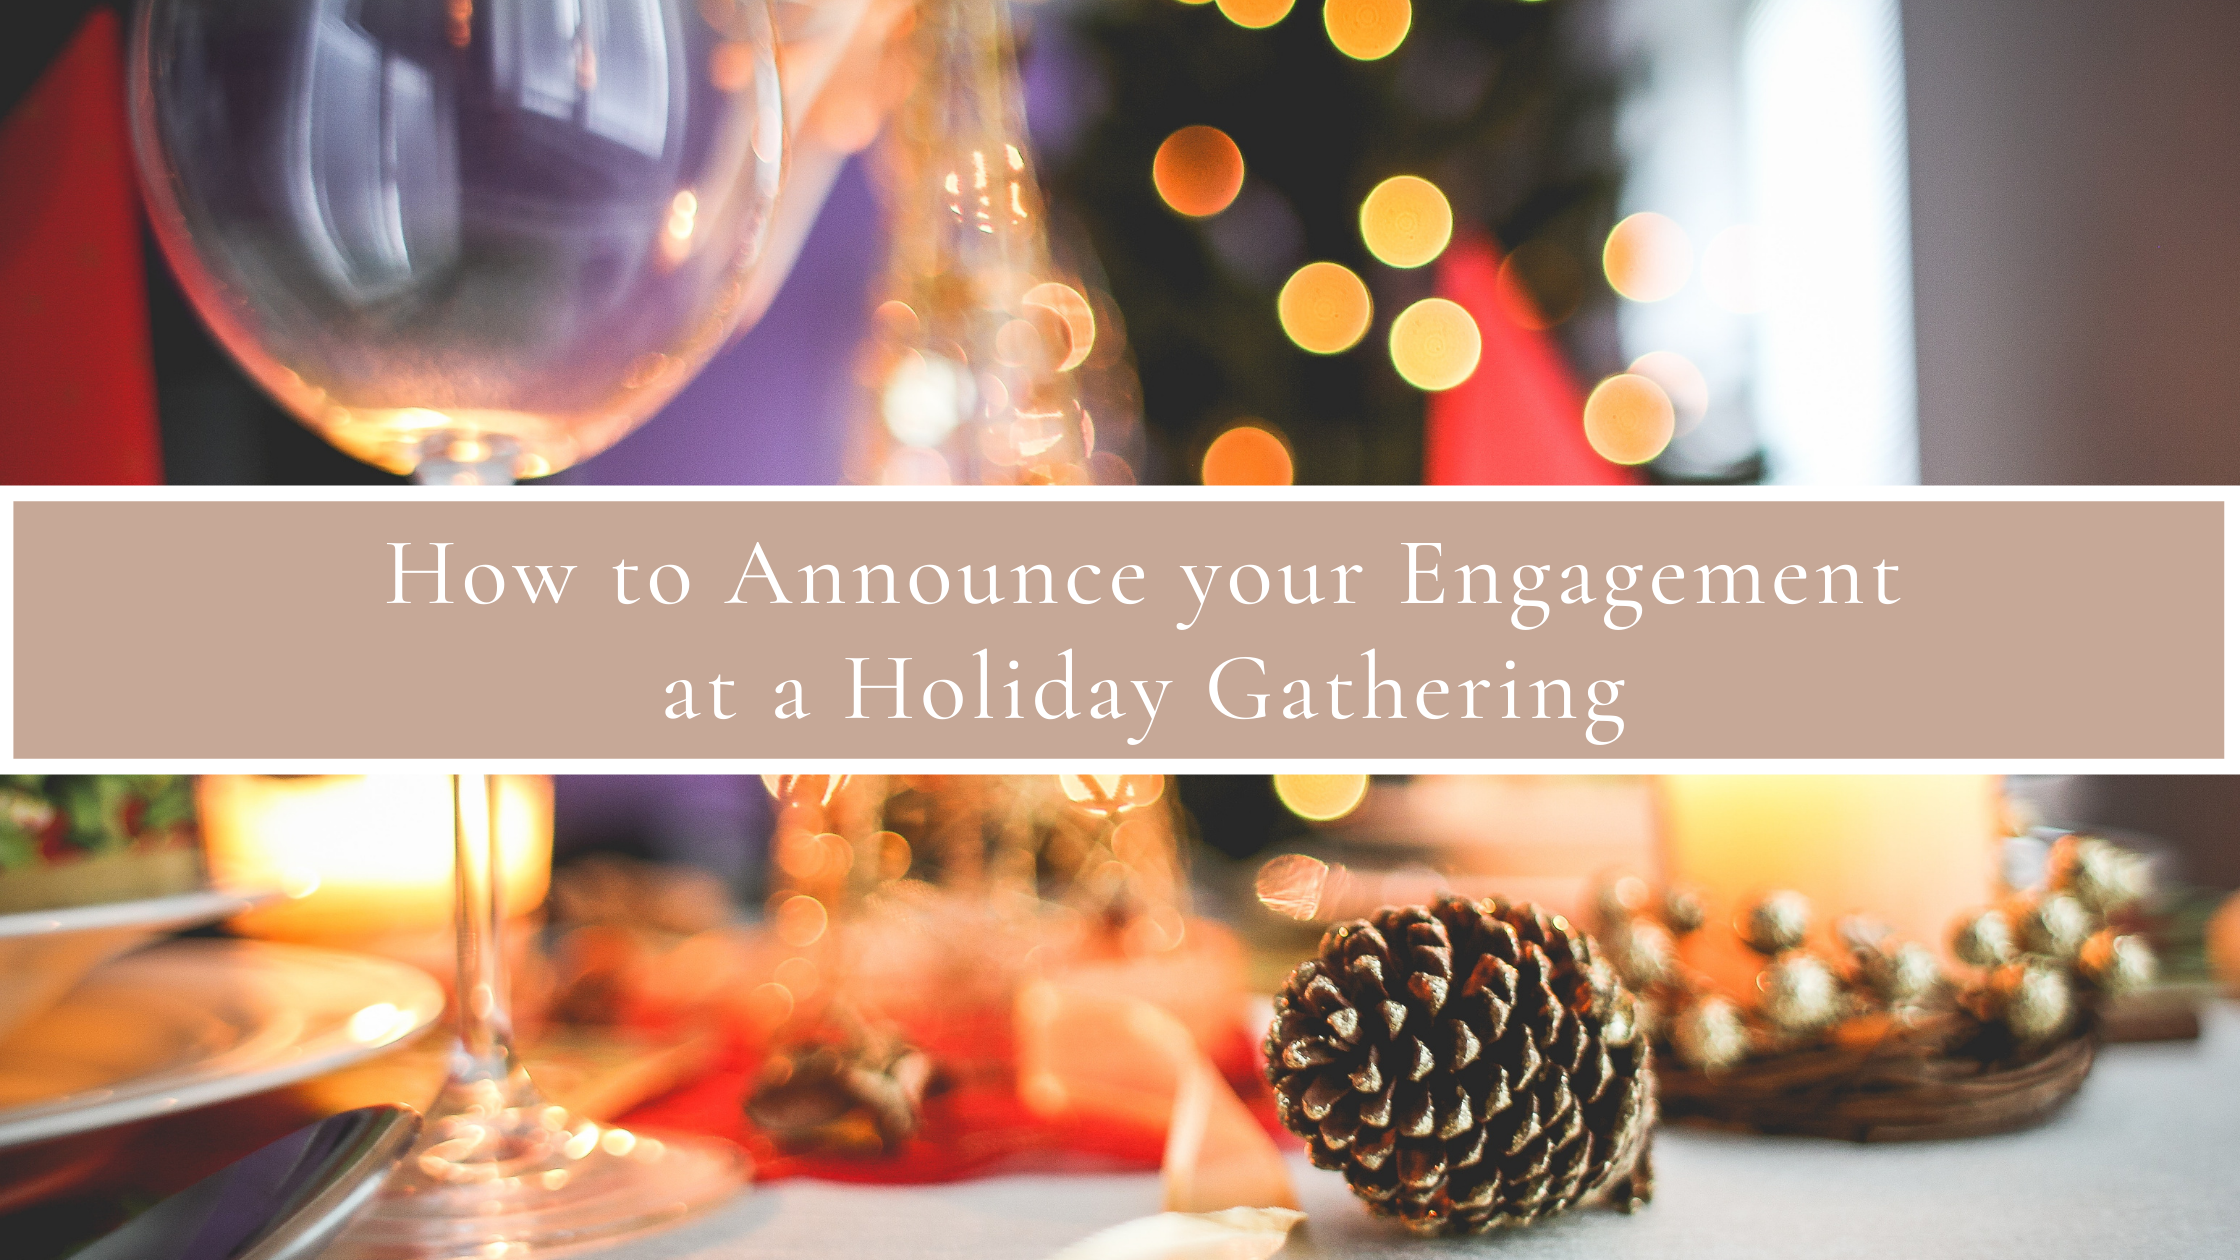 How to Announce your Engagement at a Holiday Gathering